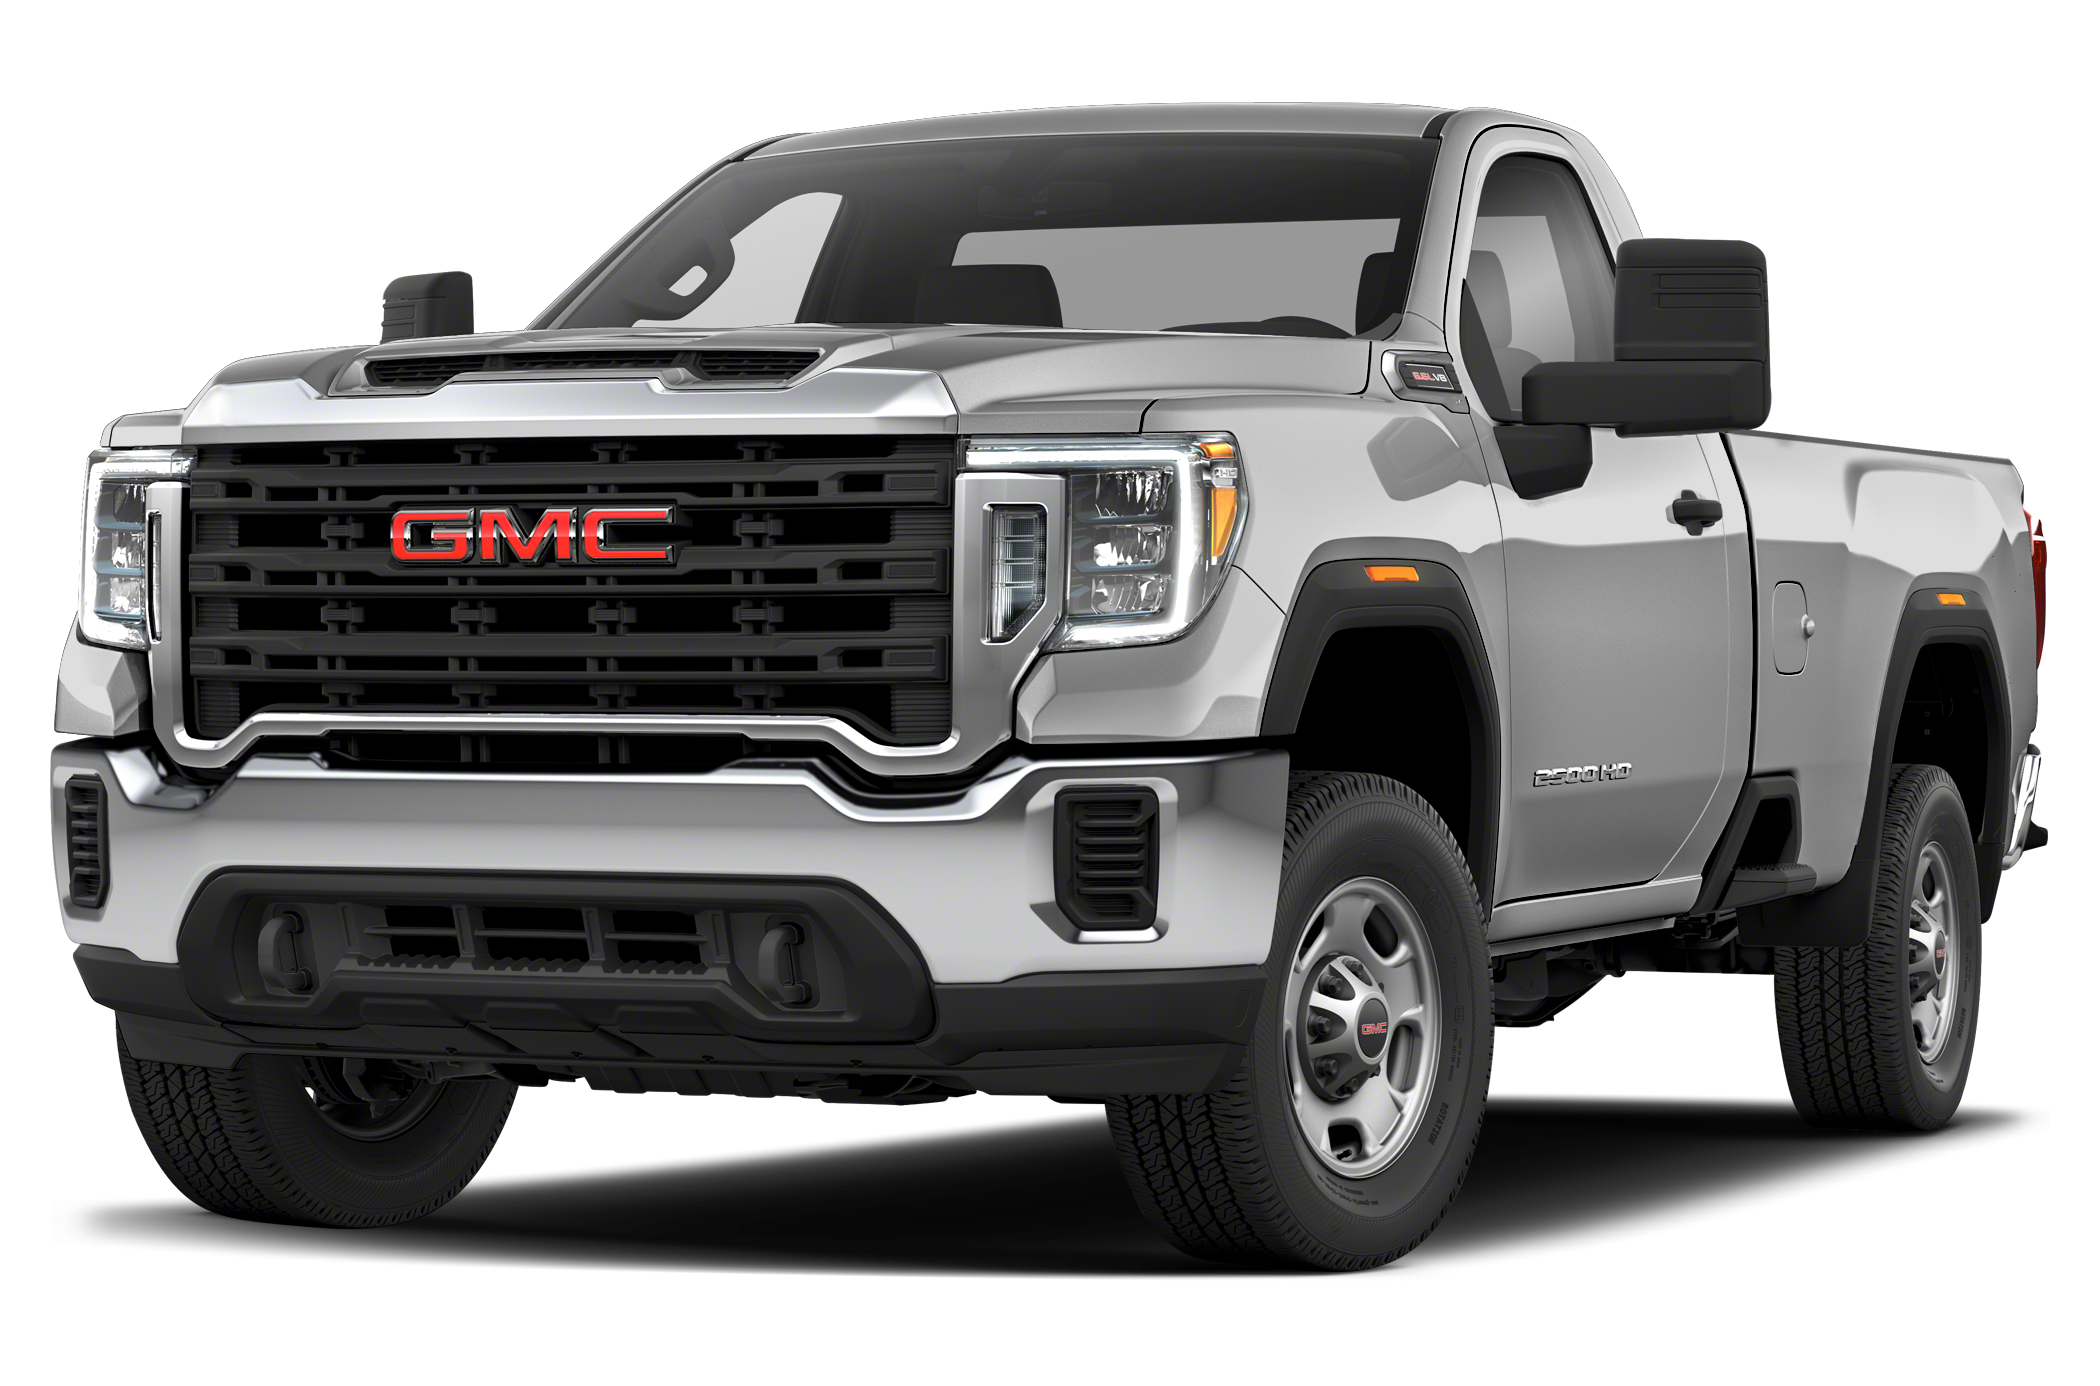 2020 Gmc Sierra 2500hd View Specs Prices And Photos Wheelsca